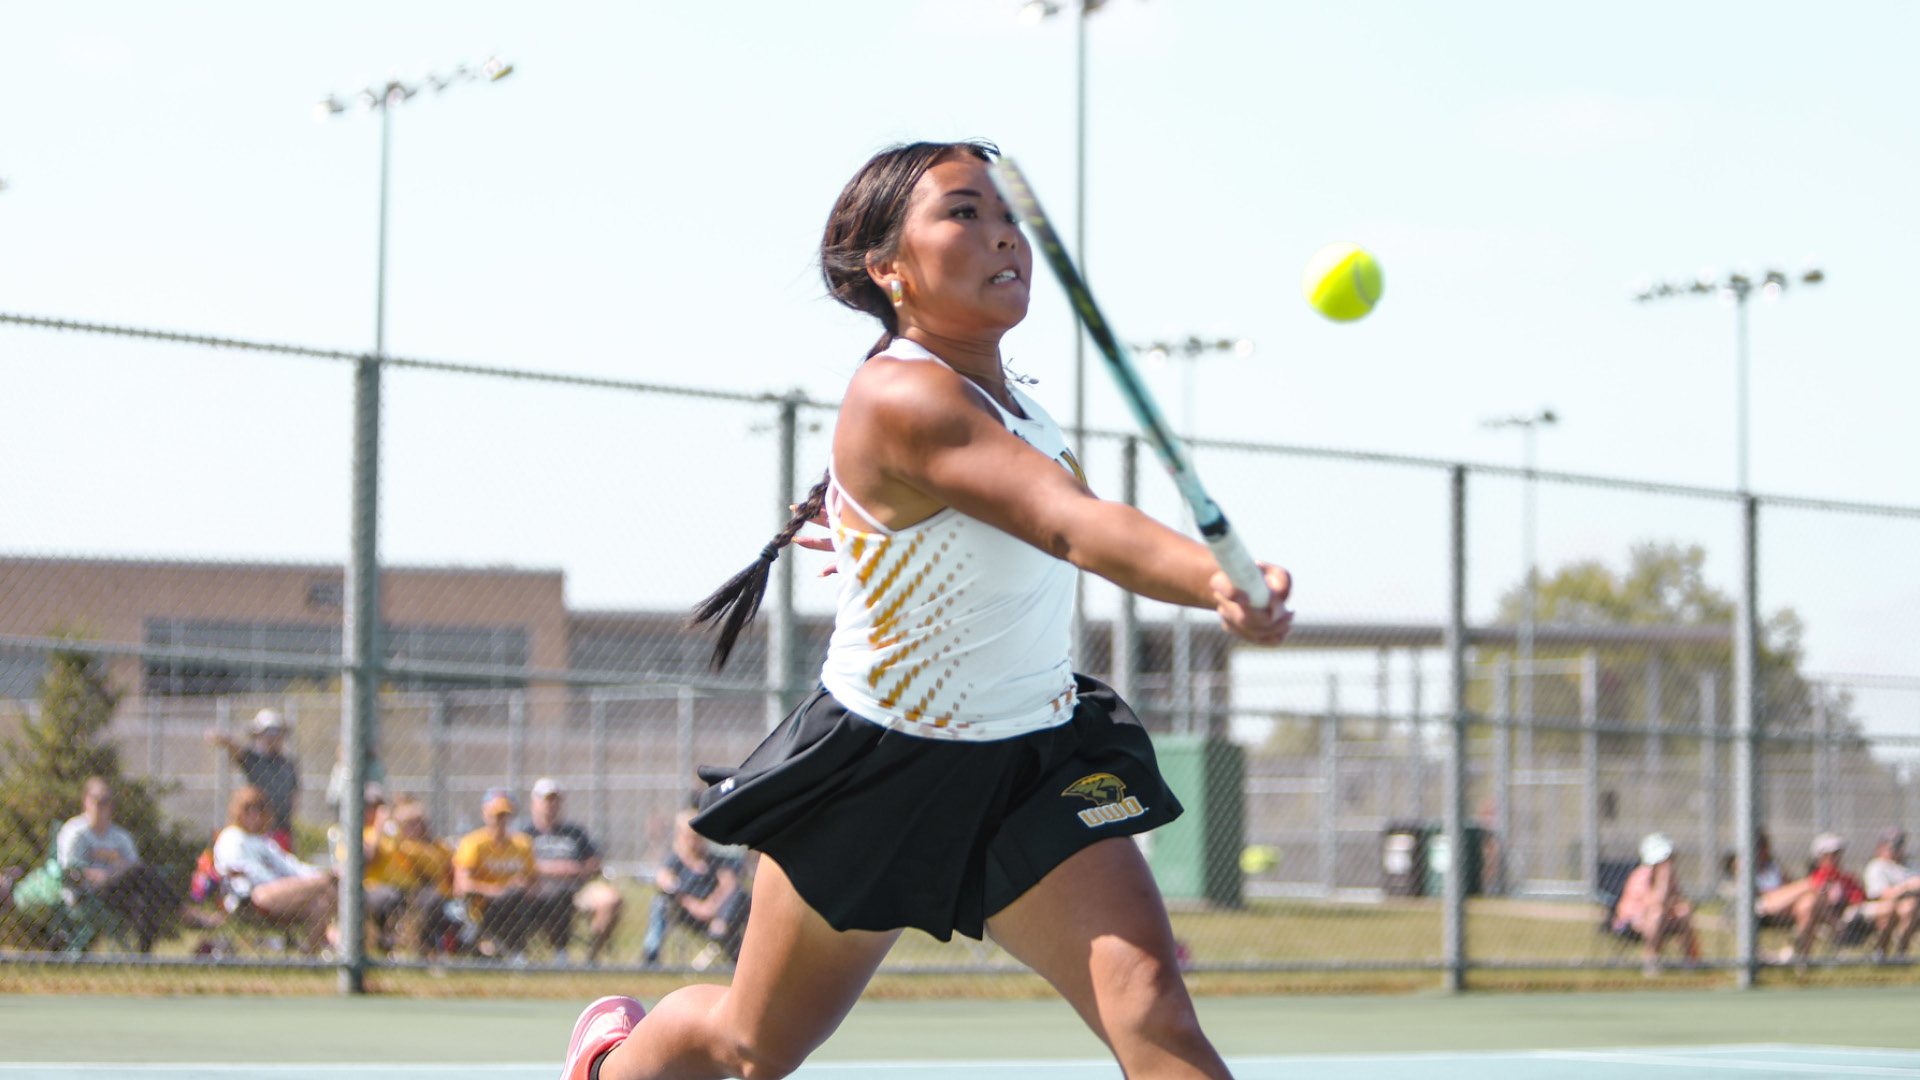 Ella Nguyen posted a 6-3, 6-2 singles win and competed with Courtney Carpenter for an 8-6 doubles win over the Yellowjackets